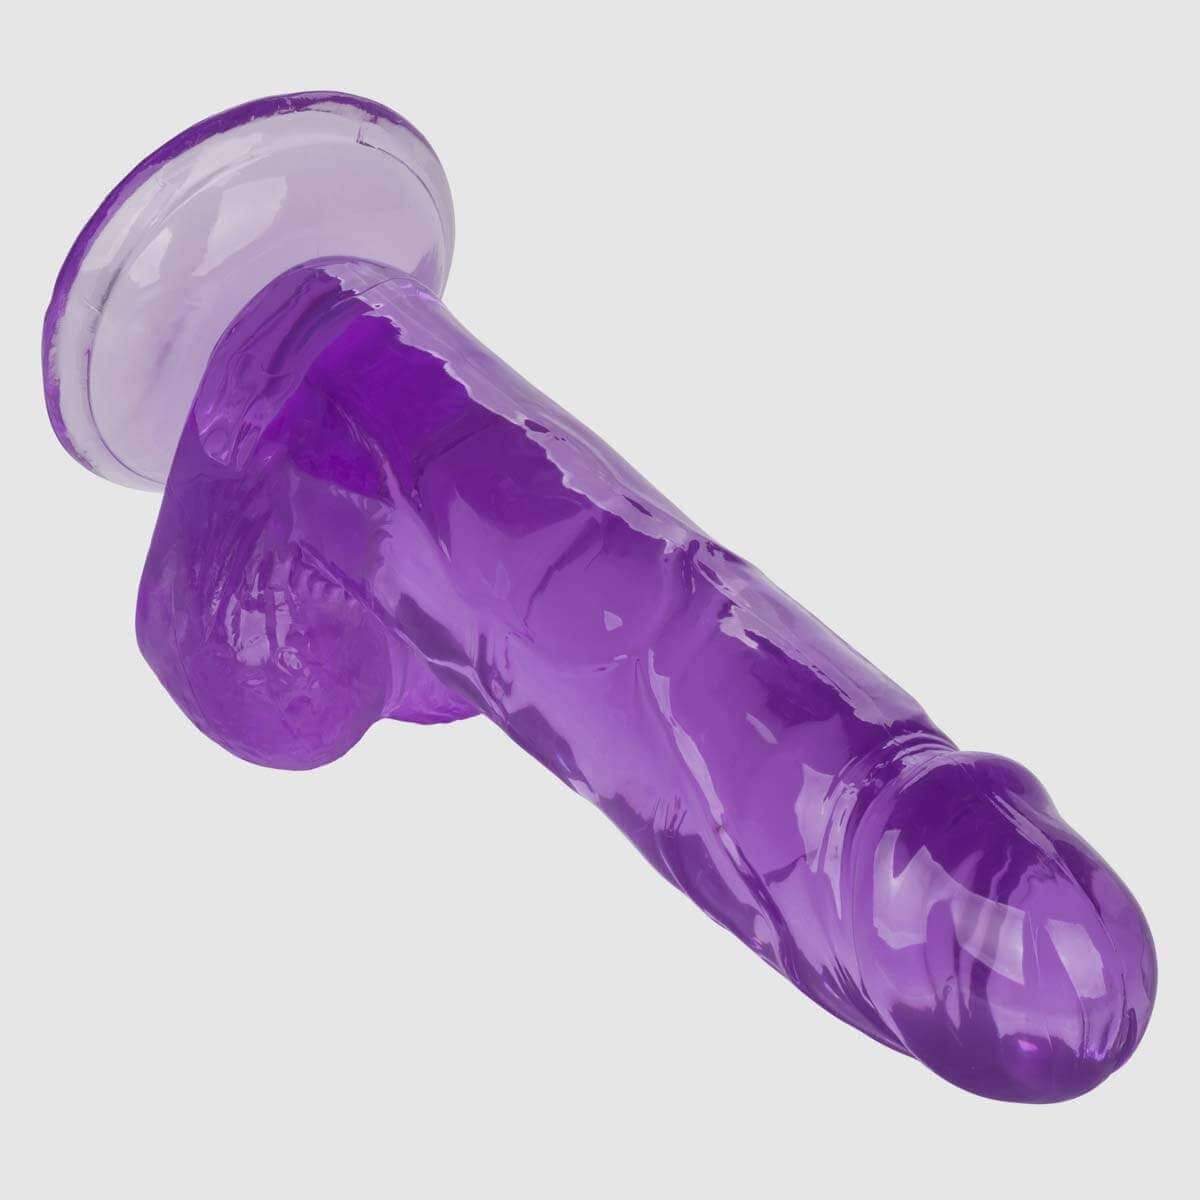 Size Queen 6"/15.25 cm Dildo - Purple - Thorn & Feather Sex Toy Canada